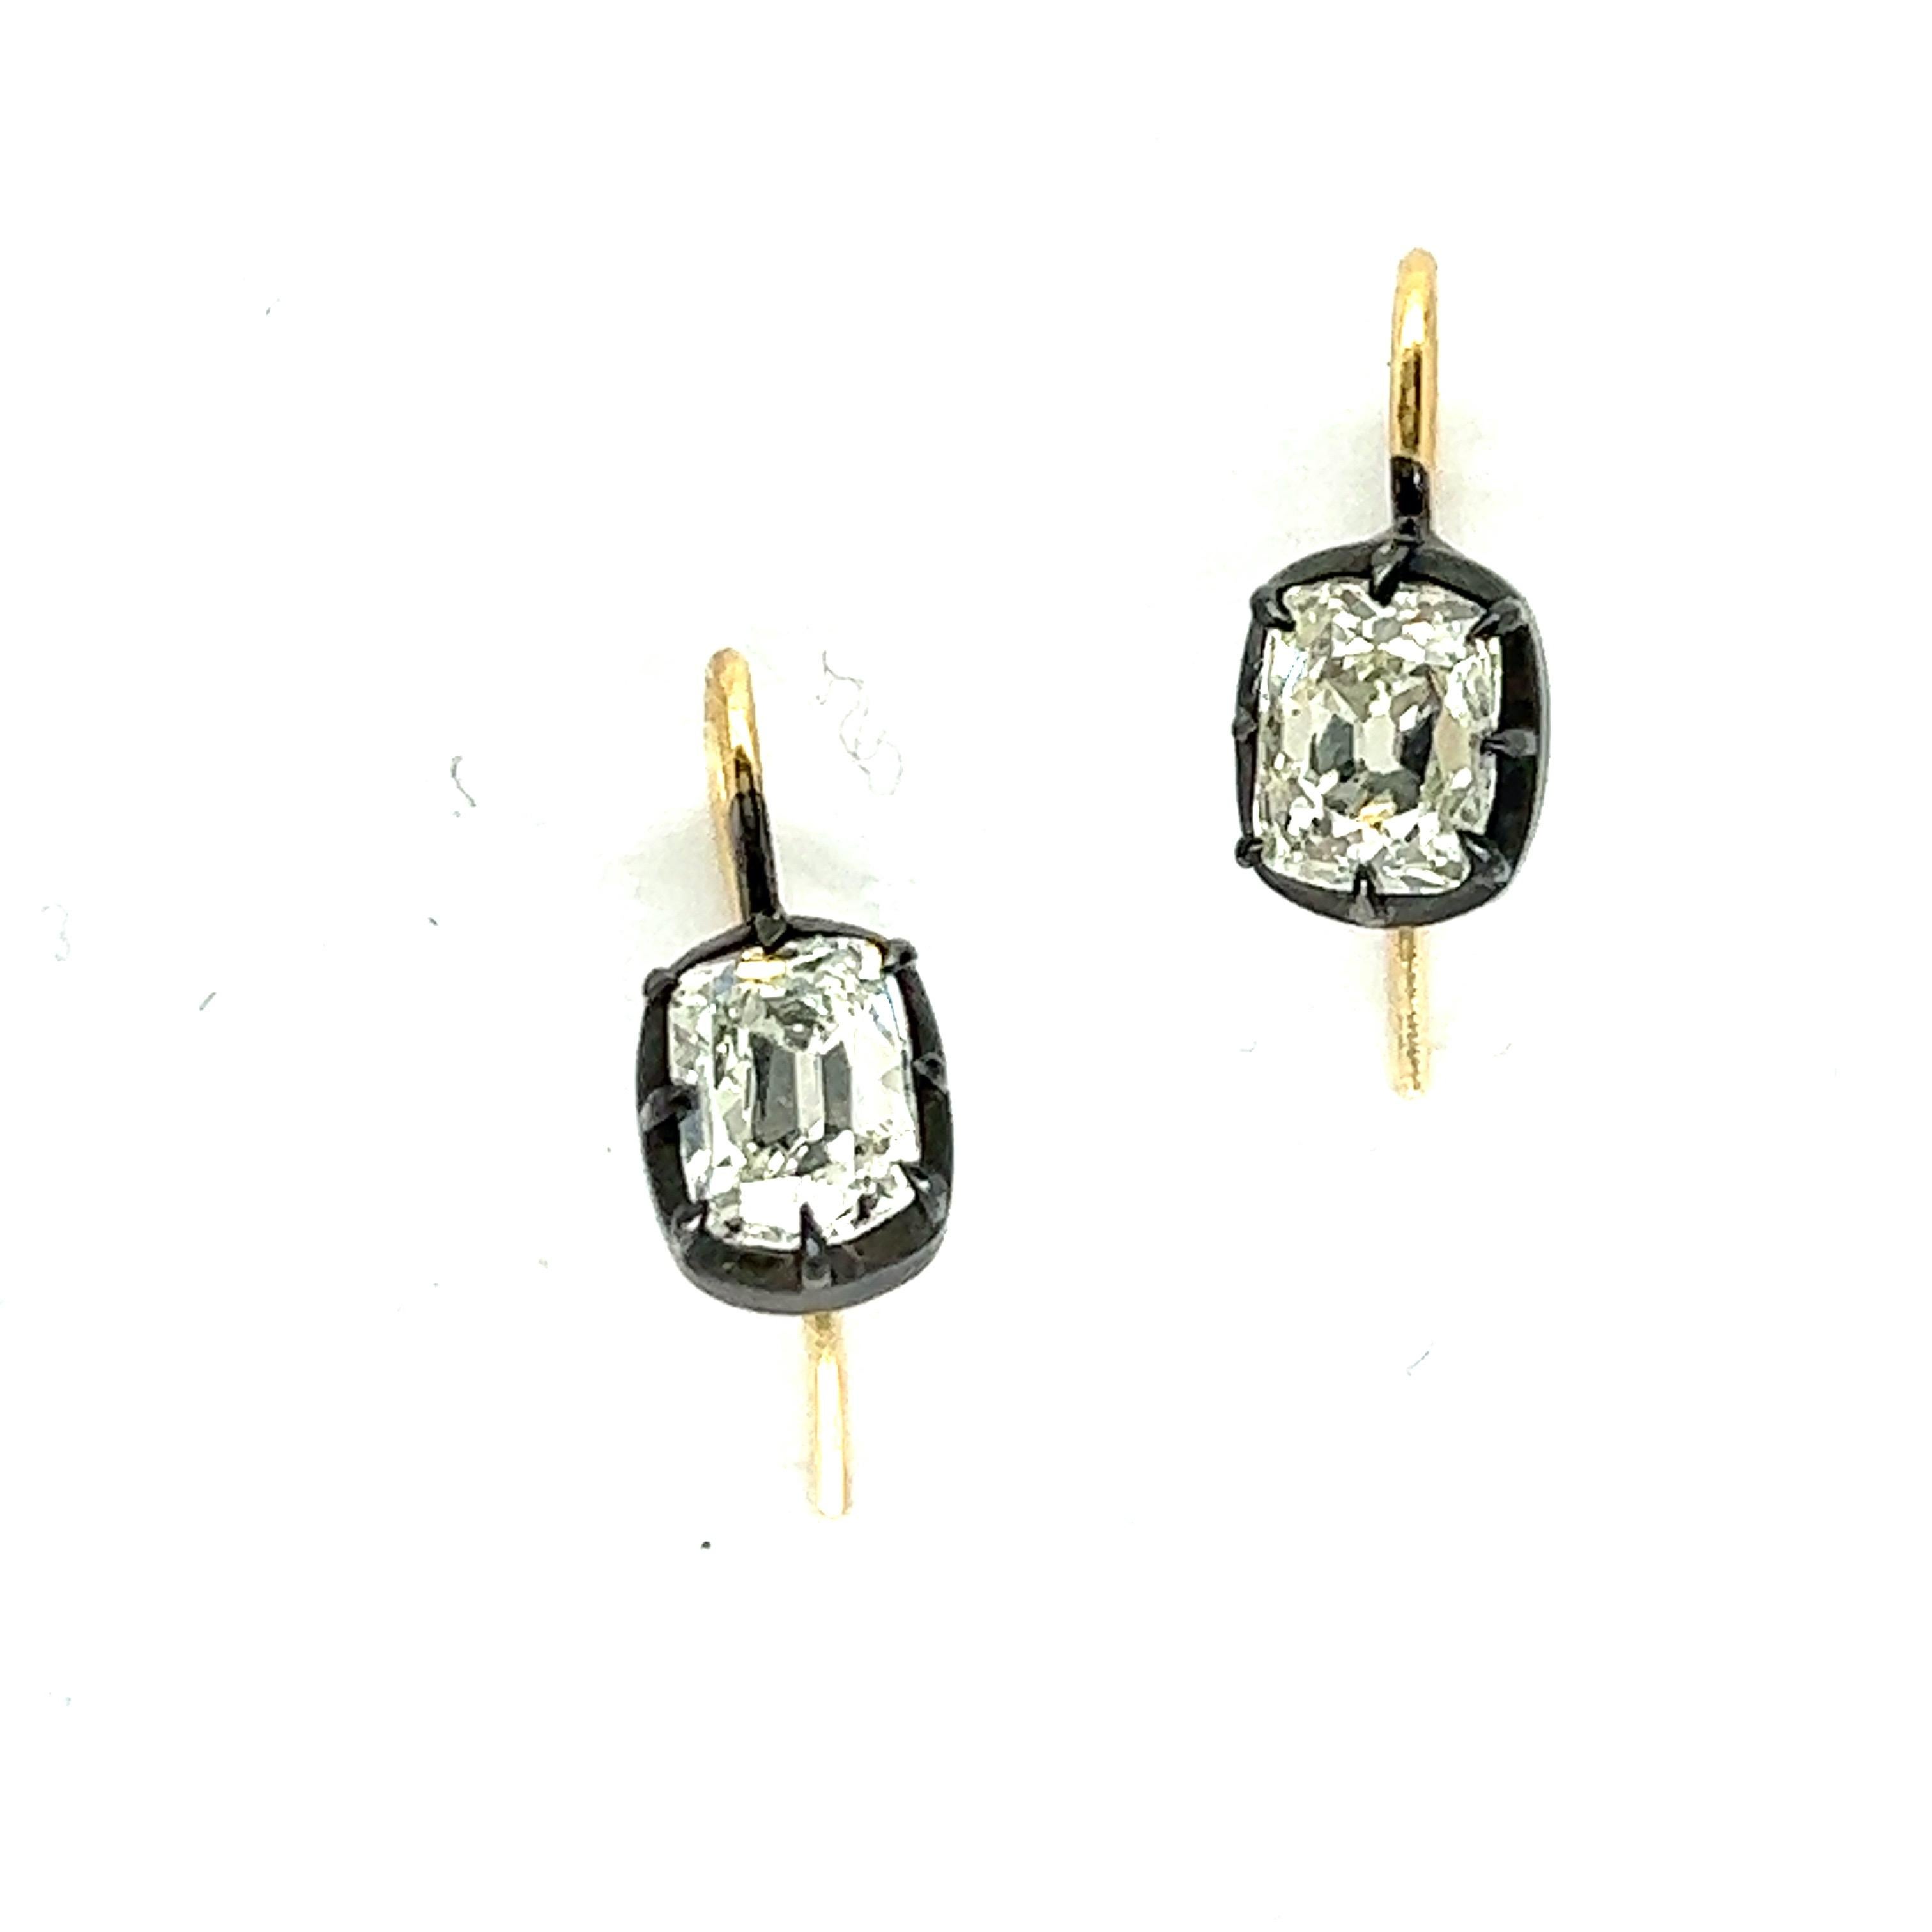 Pair of delicate 18k gold and silver earrings, featuring hook wires. Set with two cushion cut diamonds - approx. 2.15ctw total. Si1/H. Earrings measure 14mm x 6mm. Weight of the pair - 1.9 grams. 